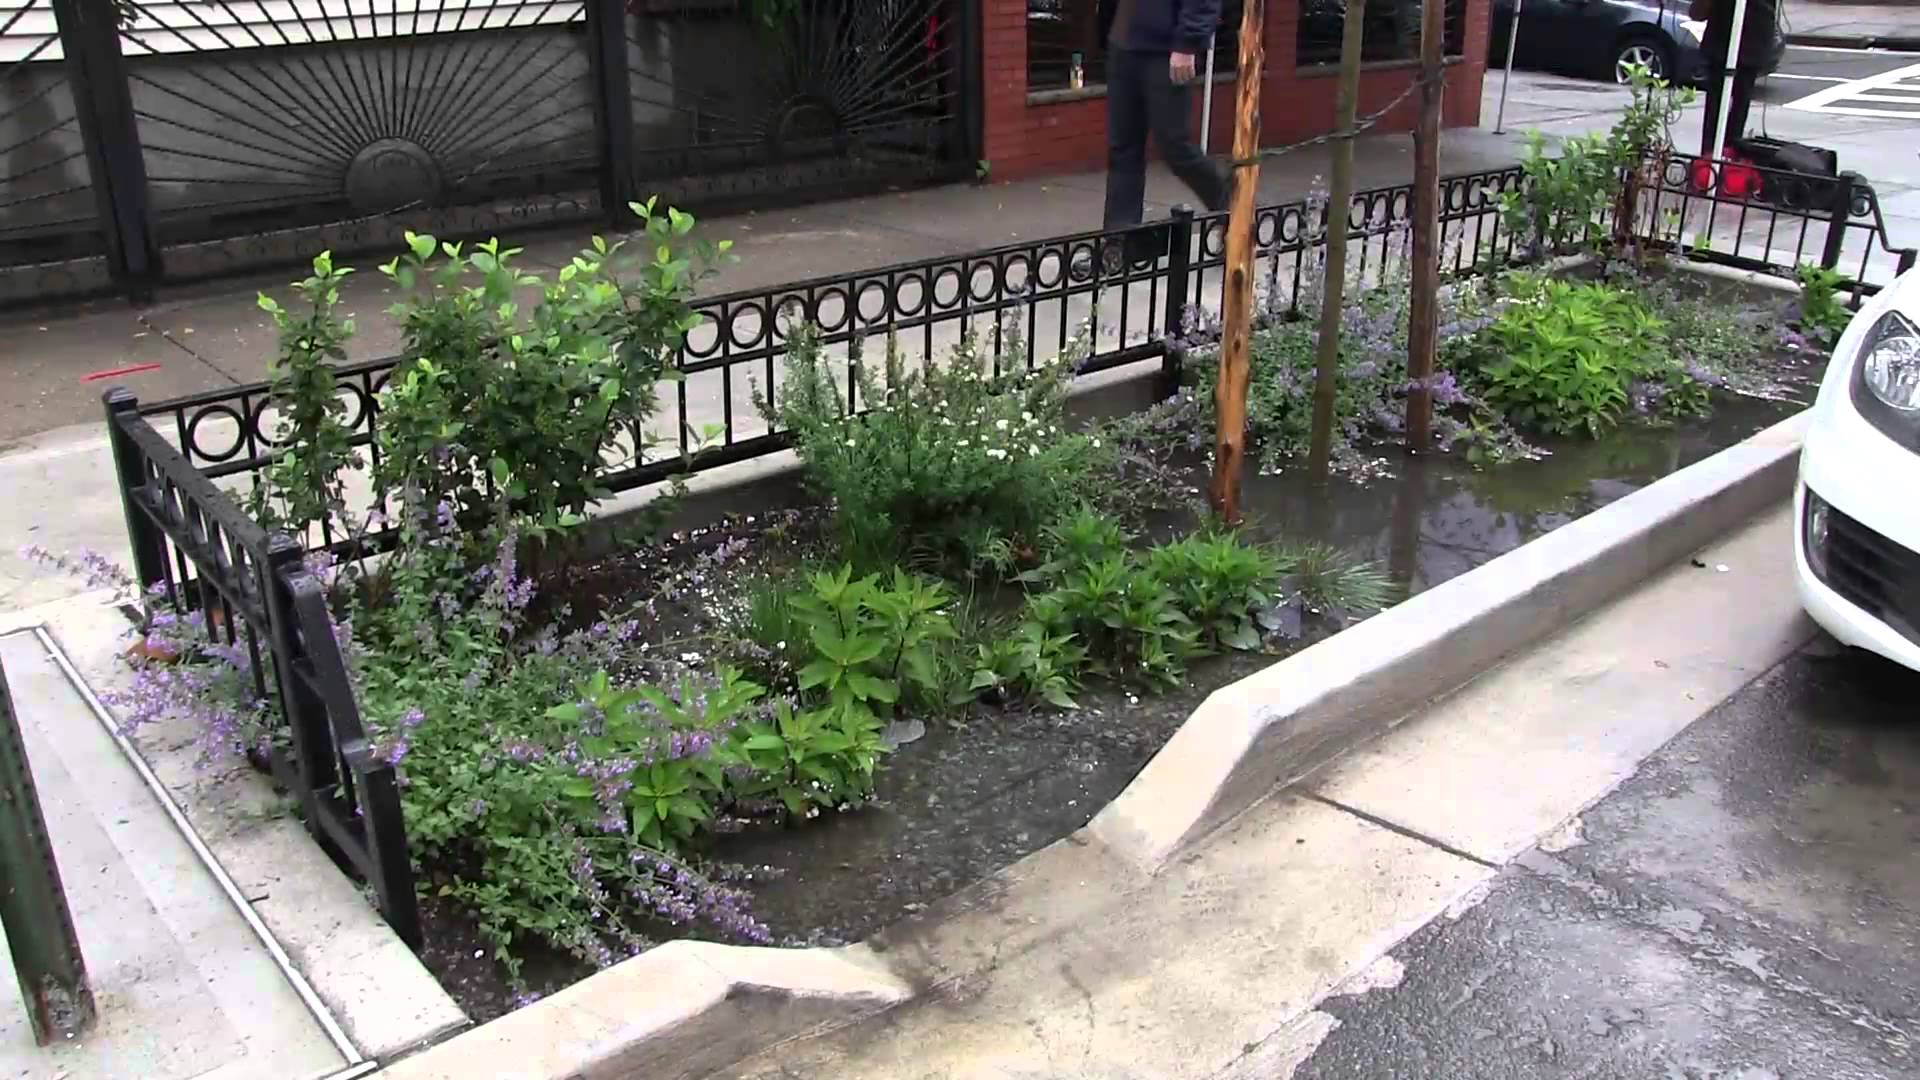 Rain Gardens Coming to Central-Southern Brooklyn